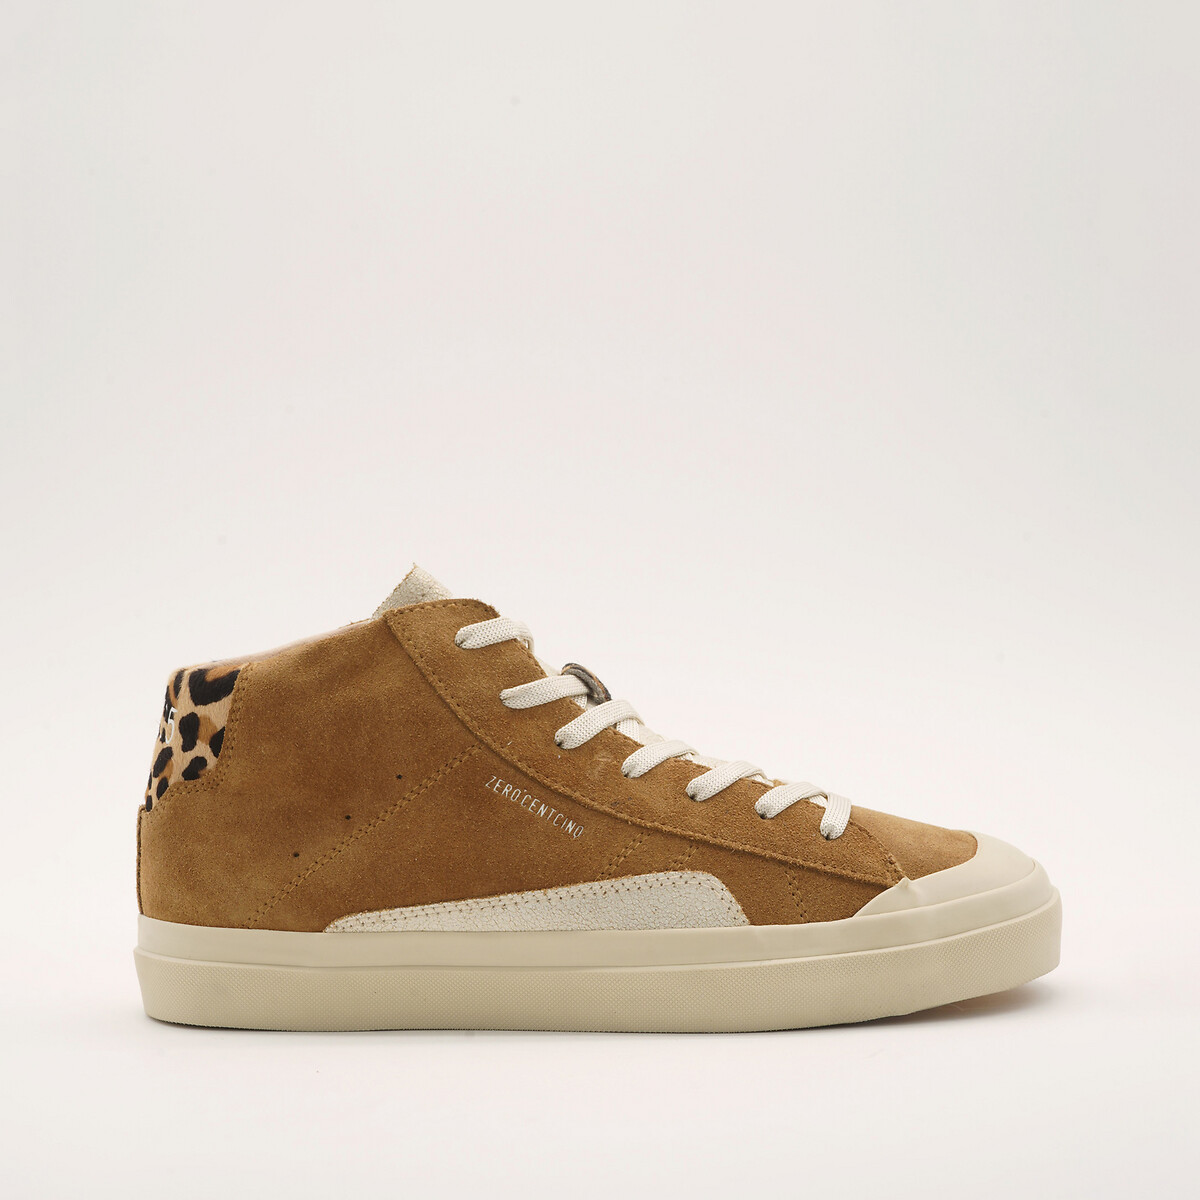 Topaz-1 High Top Trainers in Suede